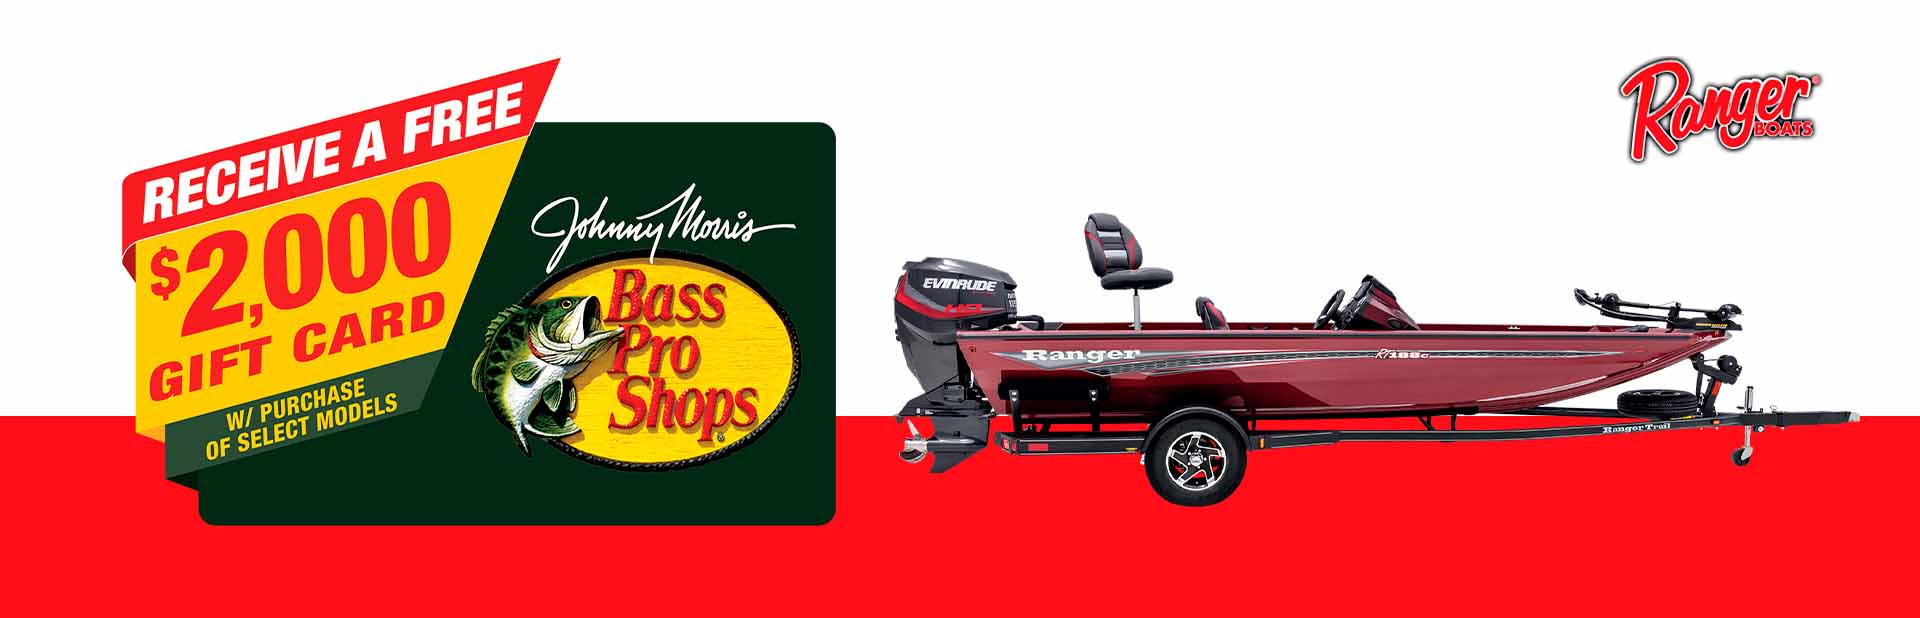 Factory Promotions Orléans Boat World & Sports Ottawa, ON (613) 830-7576